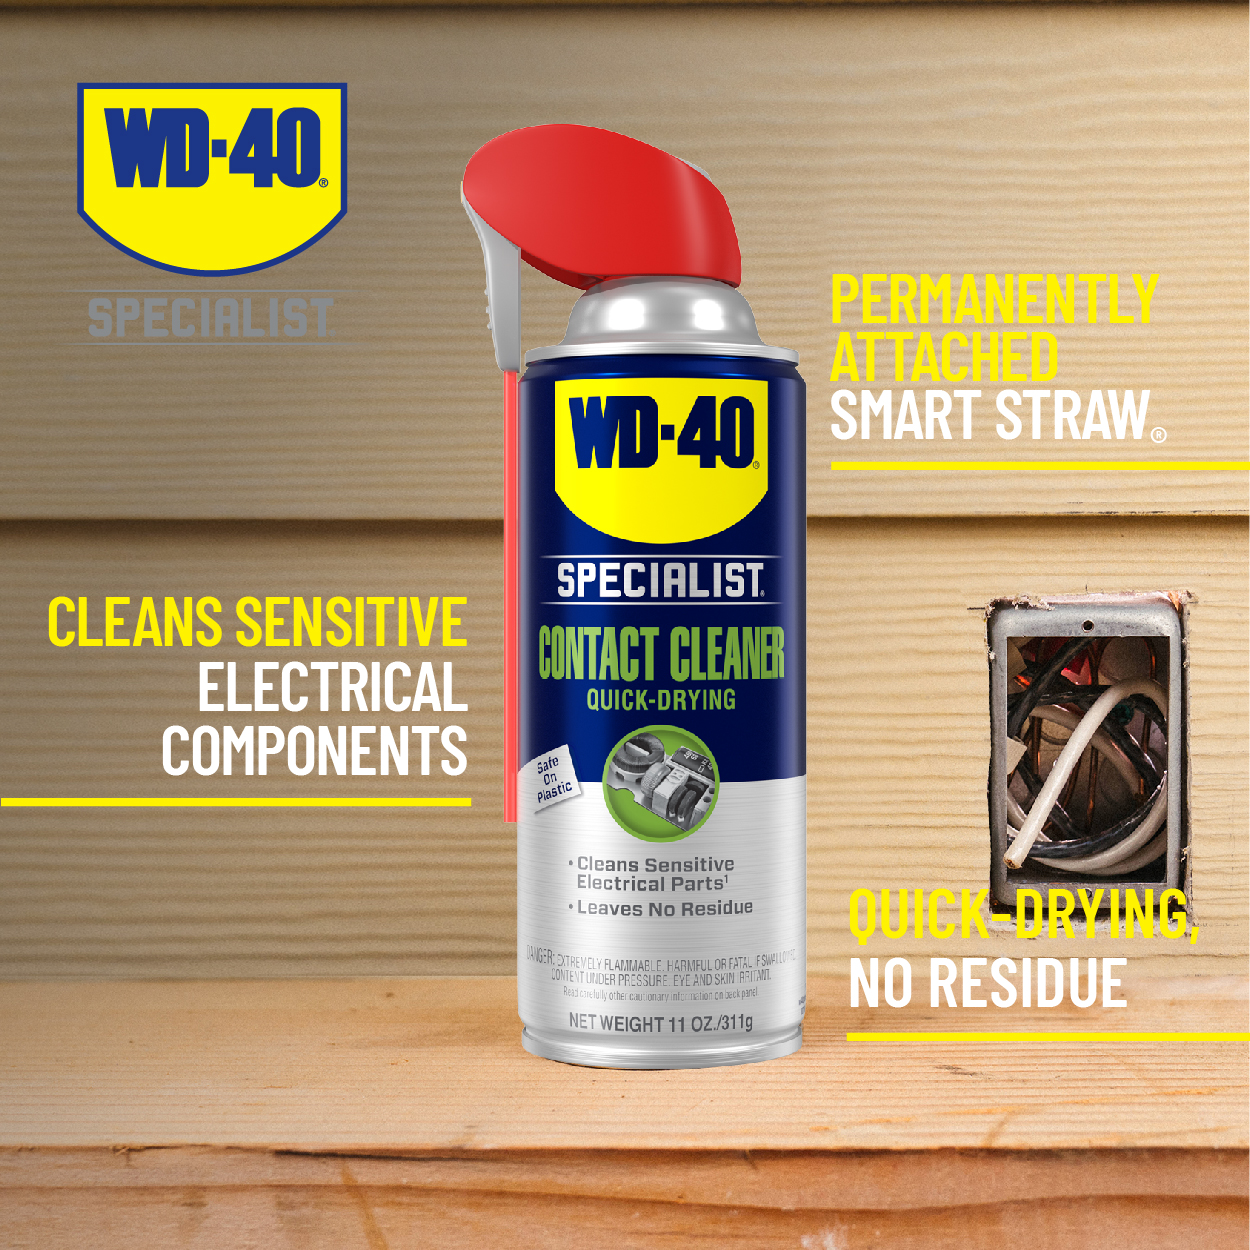 WD-40 Specialist Electrical Contact Cleaner, 11 oz - image 2 of 8